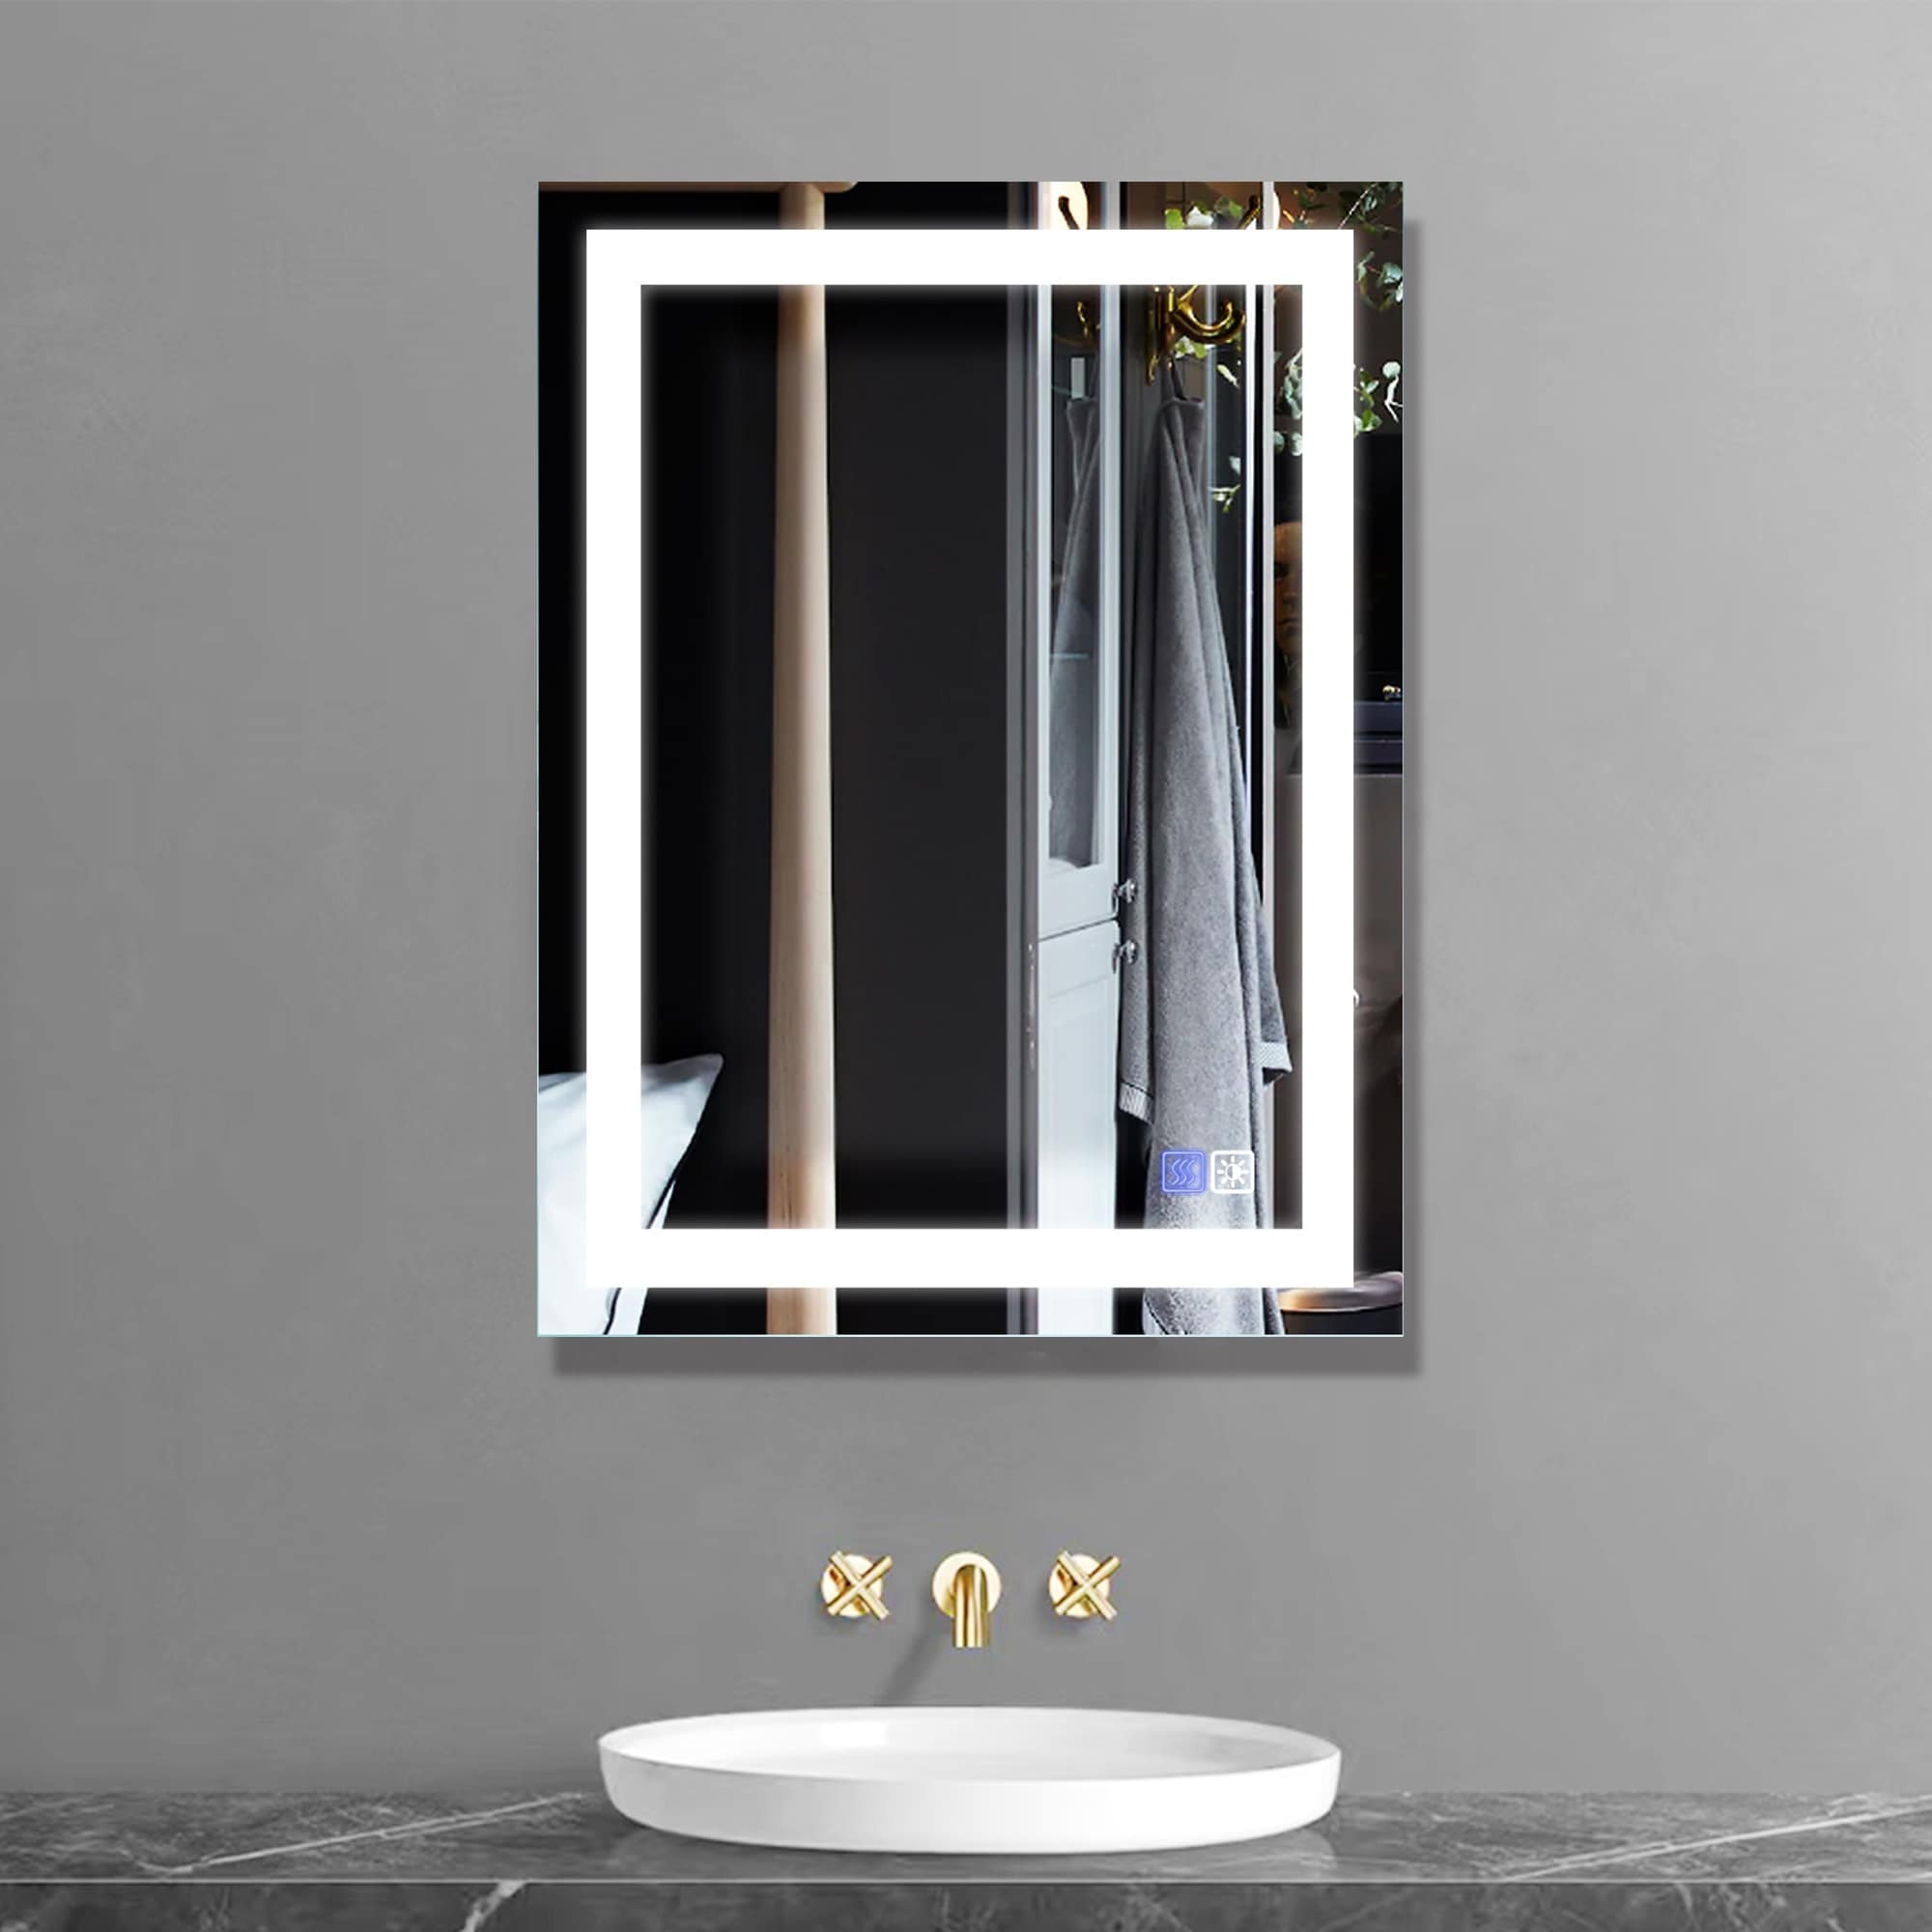 https://ak1.ostkcdn.com/images/products/is/images/direct/38b55d6d873c4c53287b406ff040846d7a3bdb9f/Rectangle-Bathroom-Mirrors-with-Led-Lights.jpg